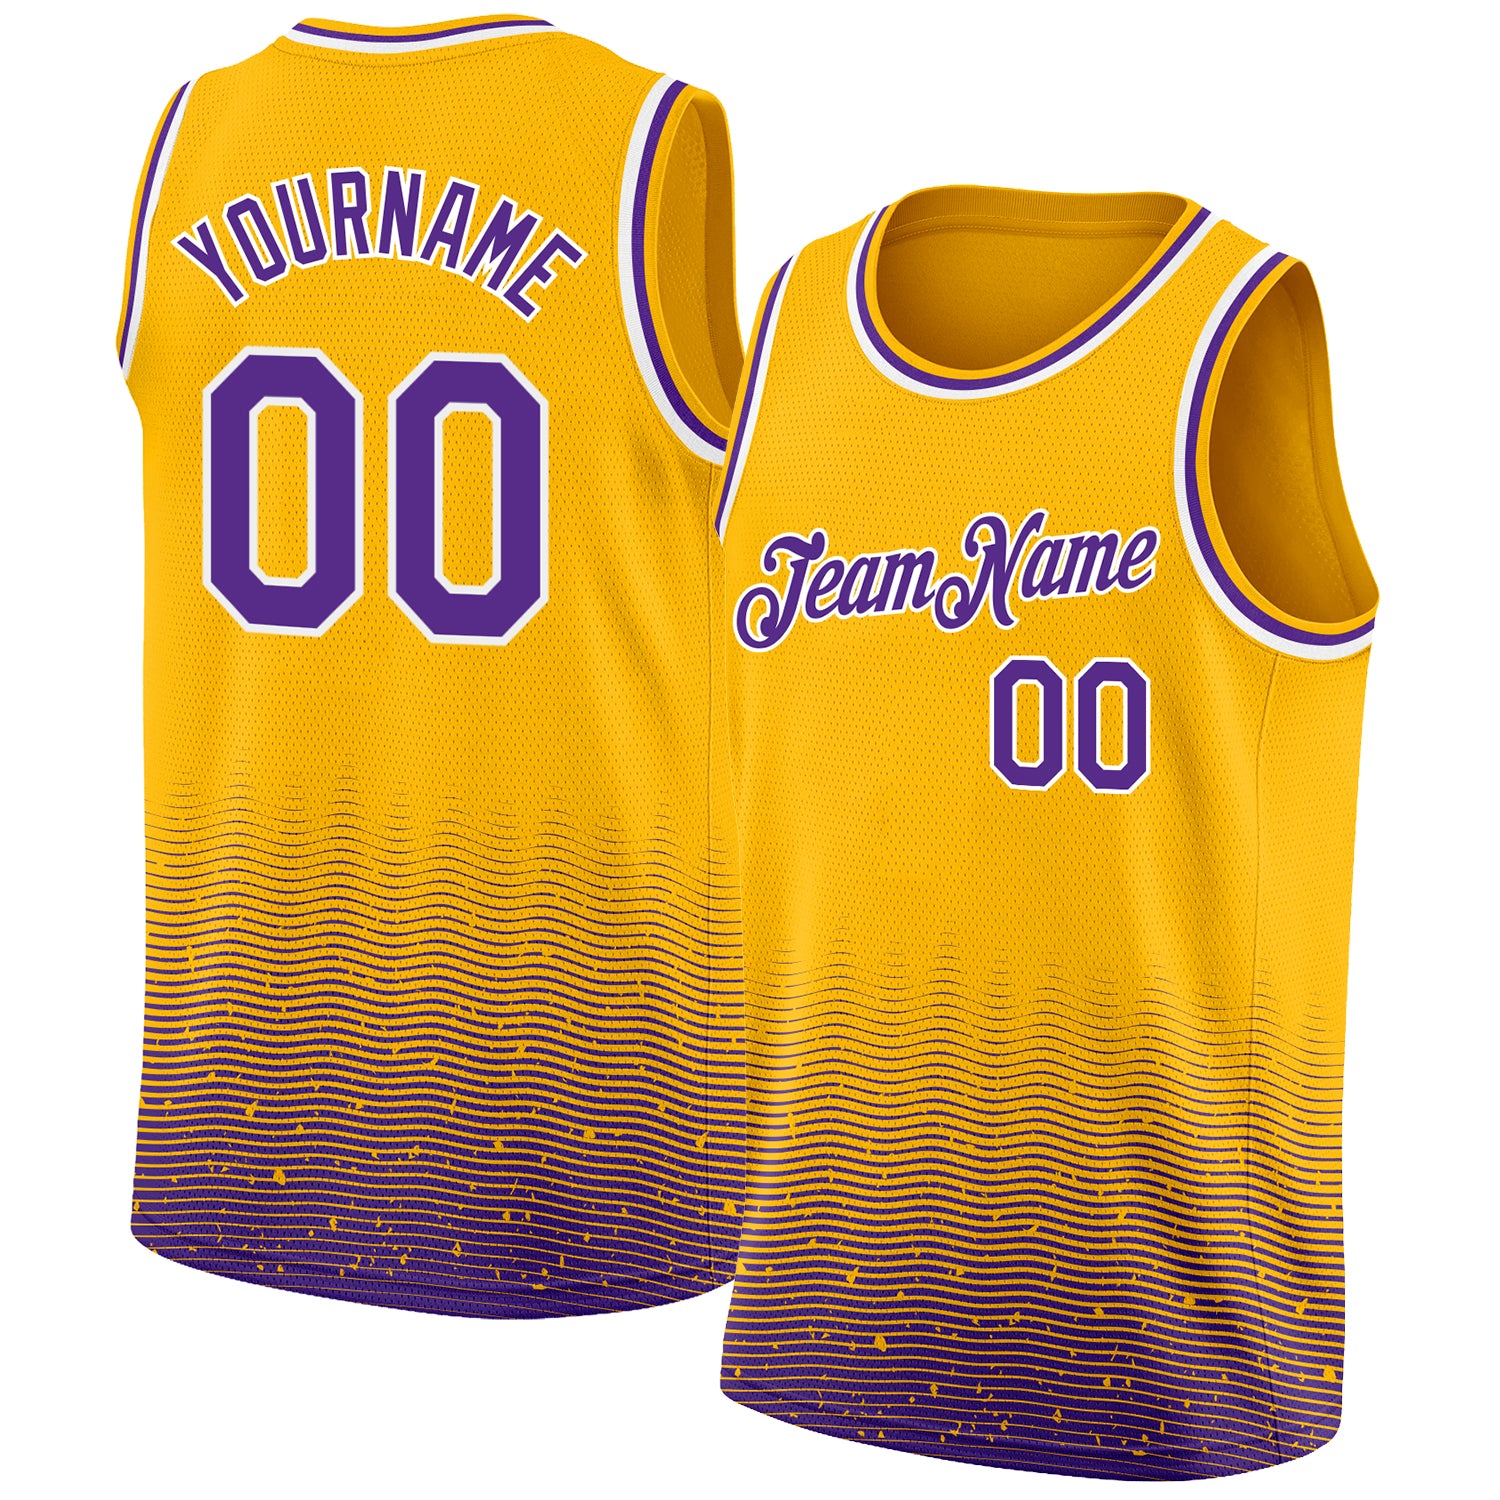 Custom Purple White-Red Authentic Fade Fashion Basketball Jersey Discount